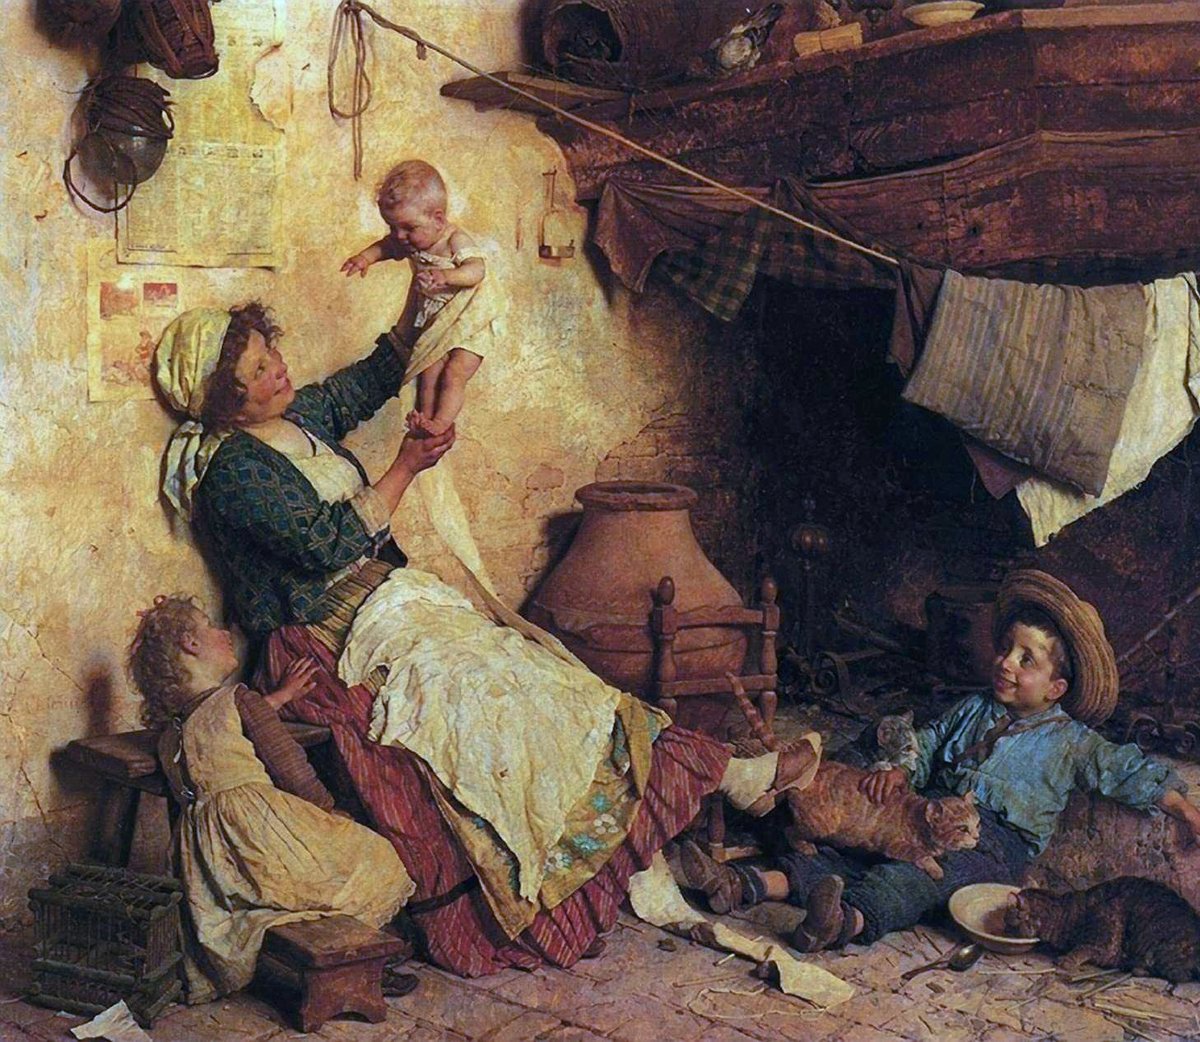 Mother's pride, Family with cats #art Gaetano Chierici